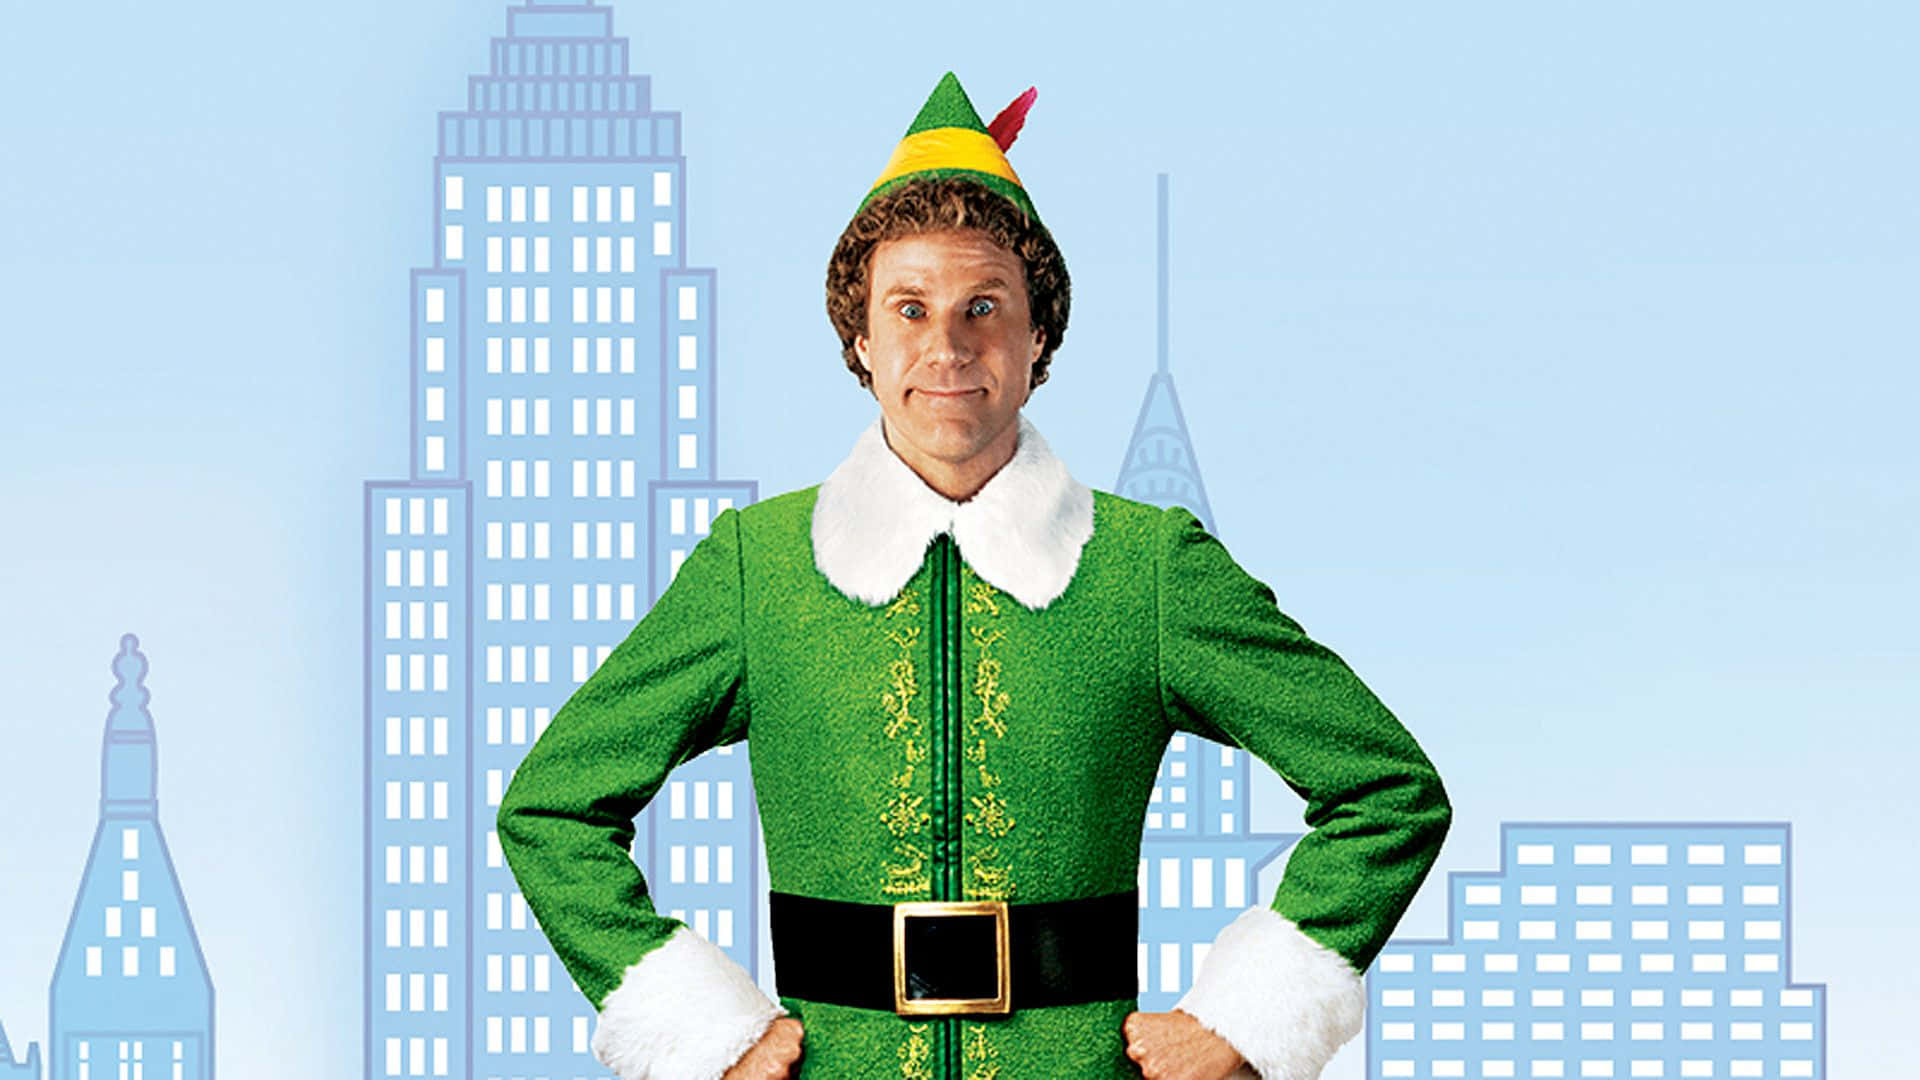 “Spreading holiday cheer, just like Buddy The Elf!” Wallpaper